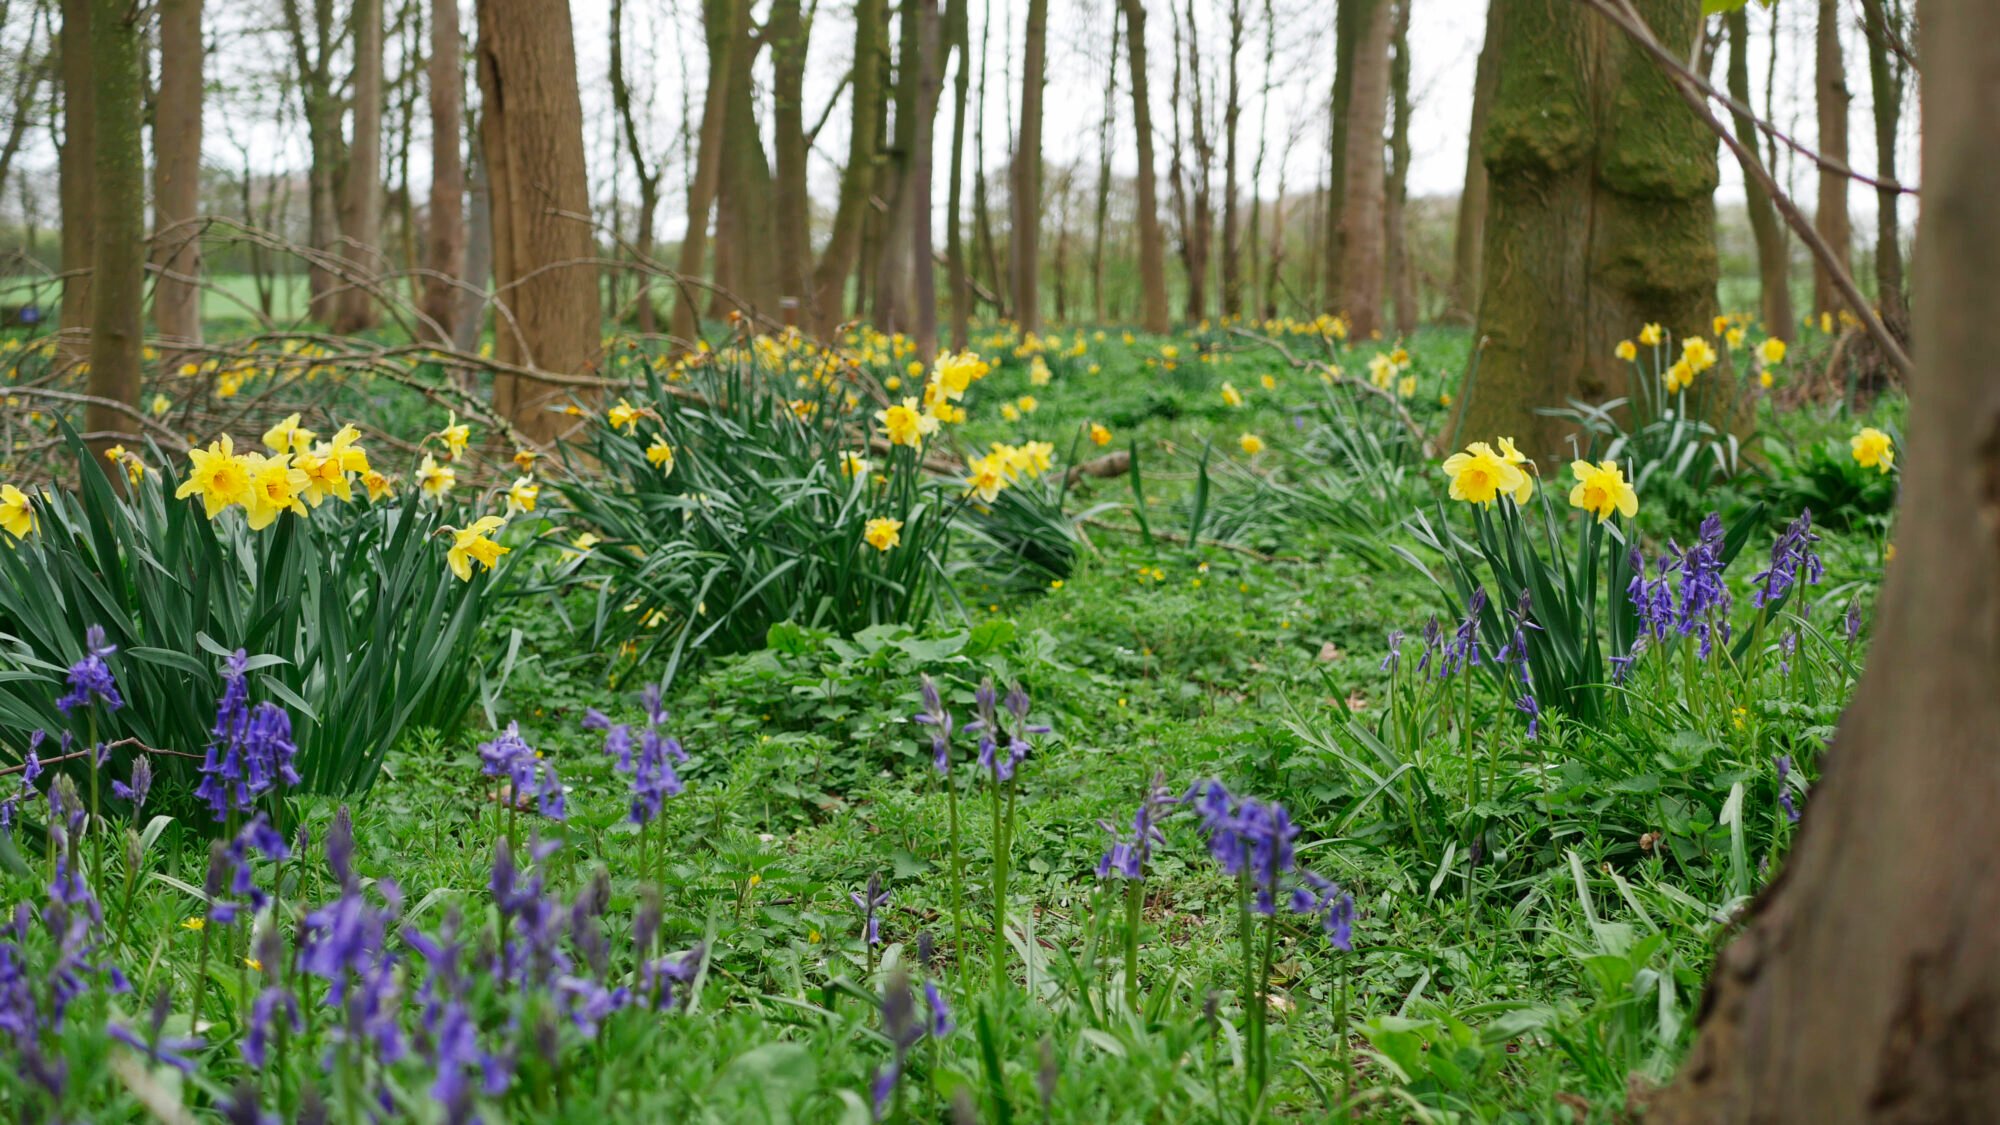 Image name daffodils at burton constable arboretum near hull the 22 image from the post Our List Of The Best Things To Do In Hull With Kids in Yorkshire.com.